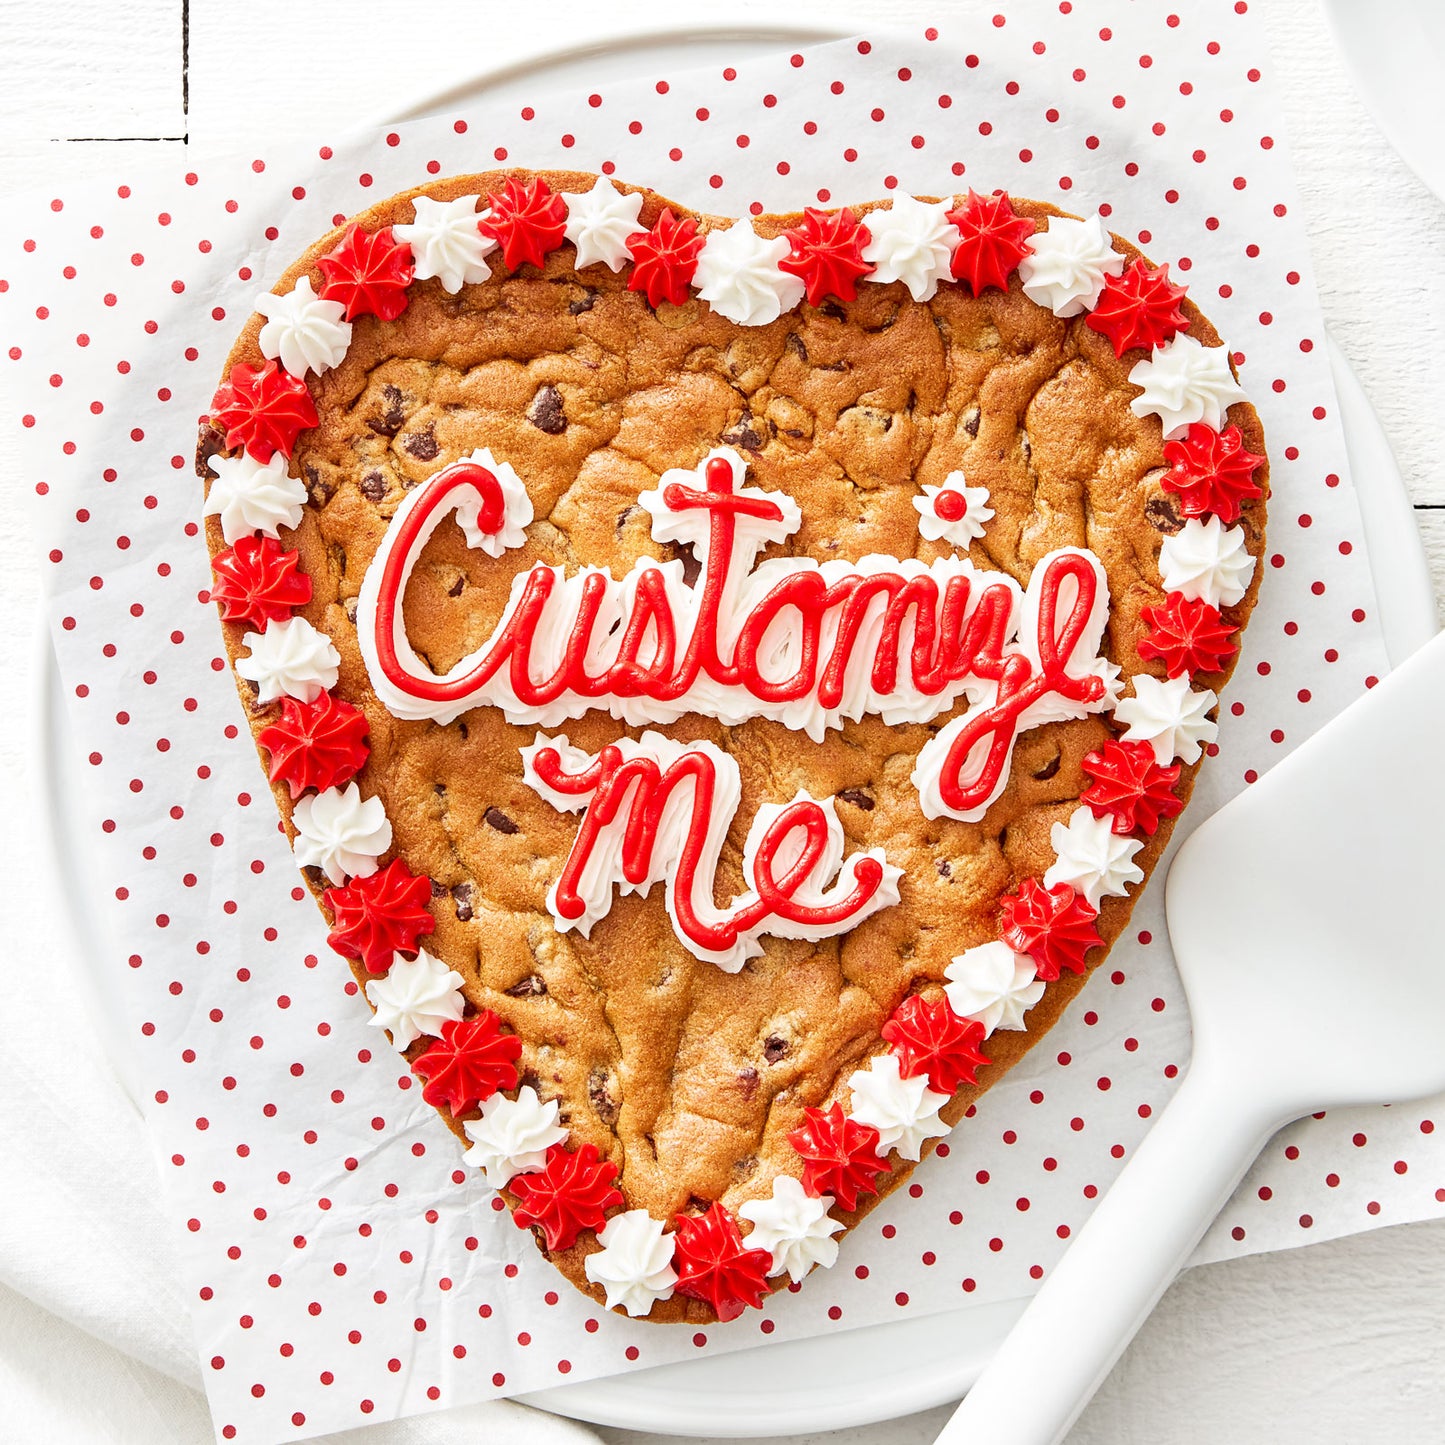 Red and white frosting saying customize me on heart shaped cookie cake